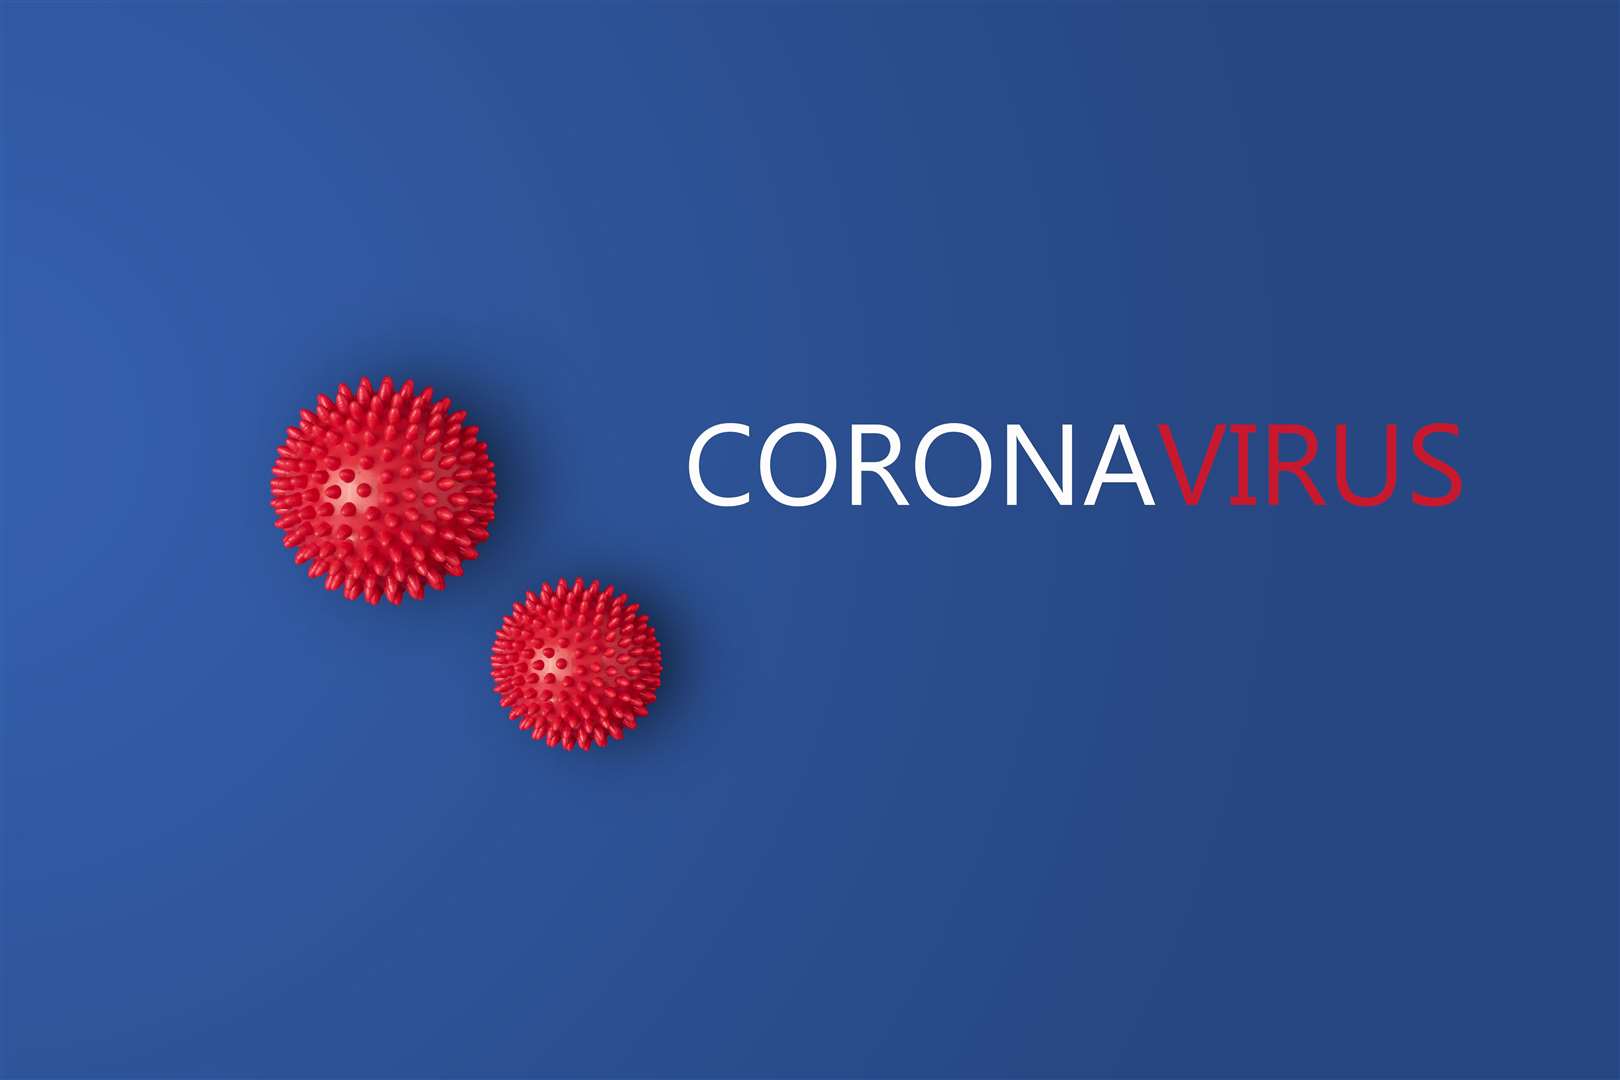 Communities are pulling together to support the vulnerable in the coronavirus outbreak.